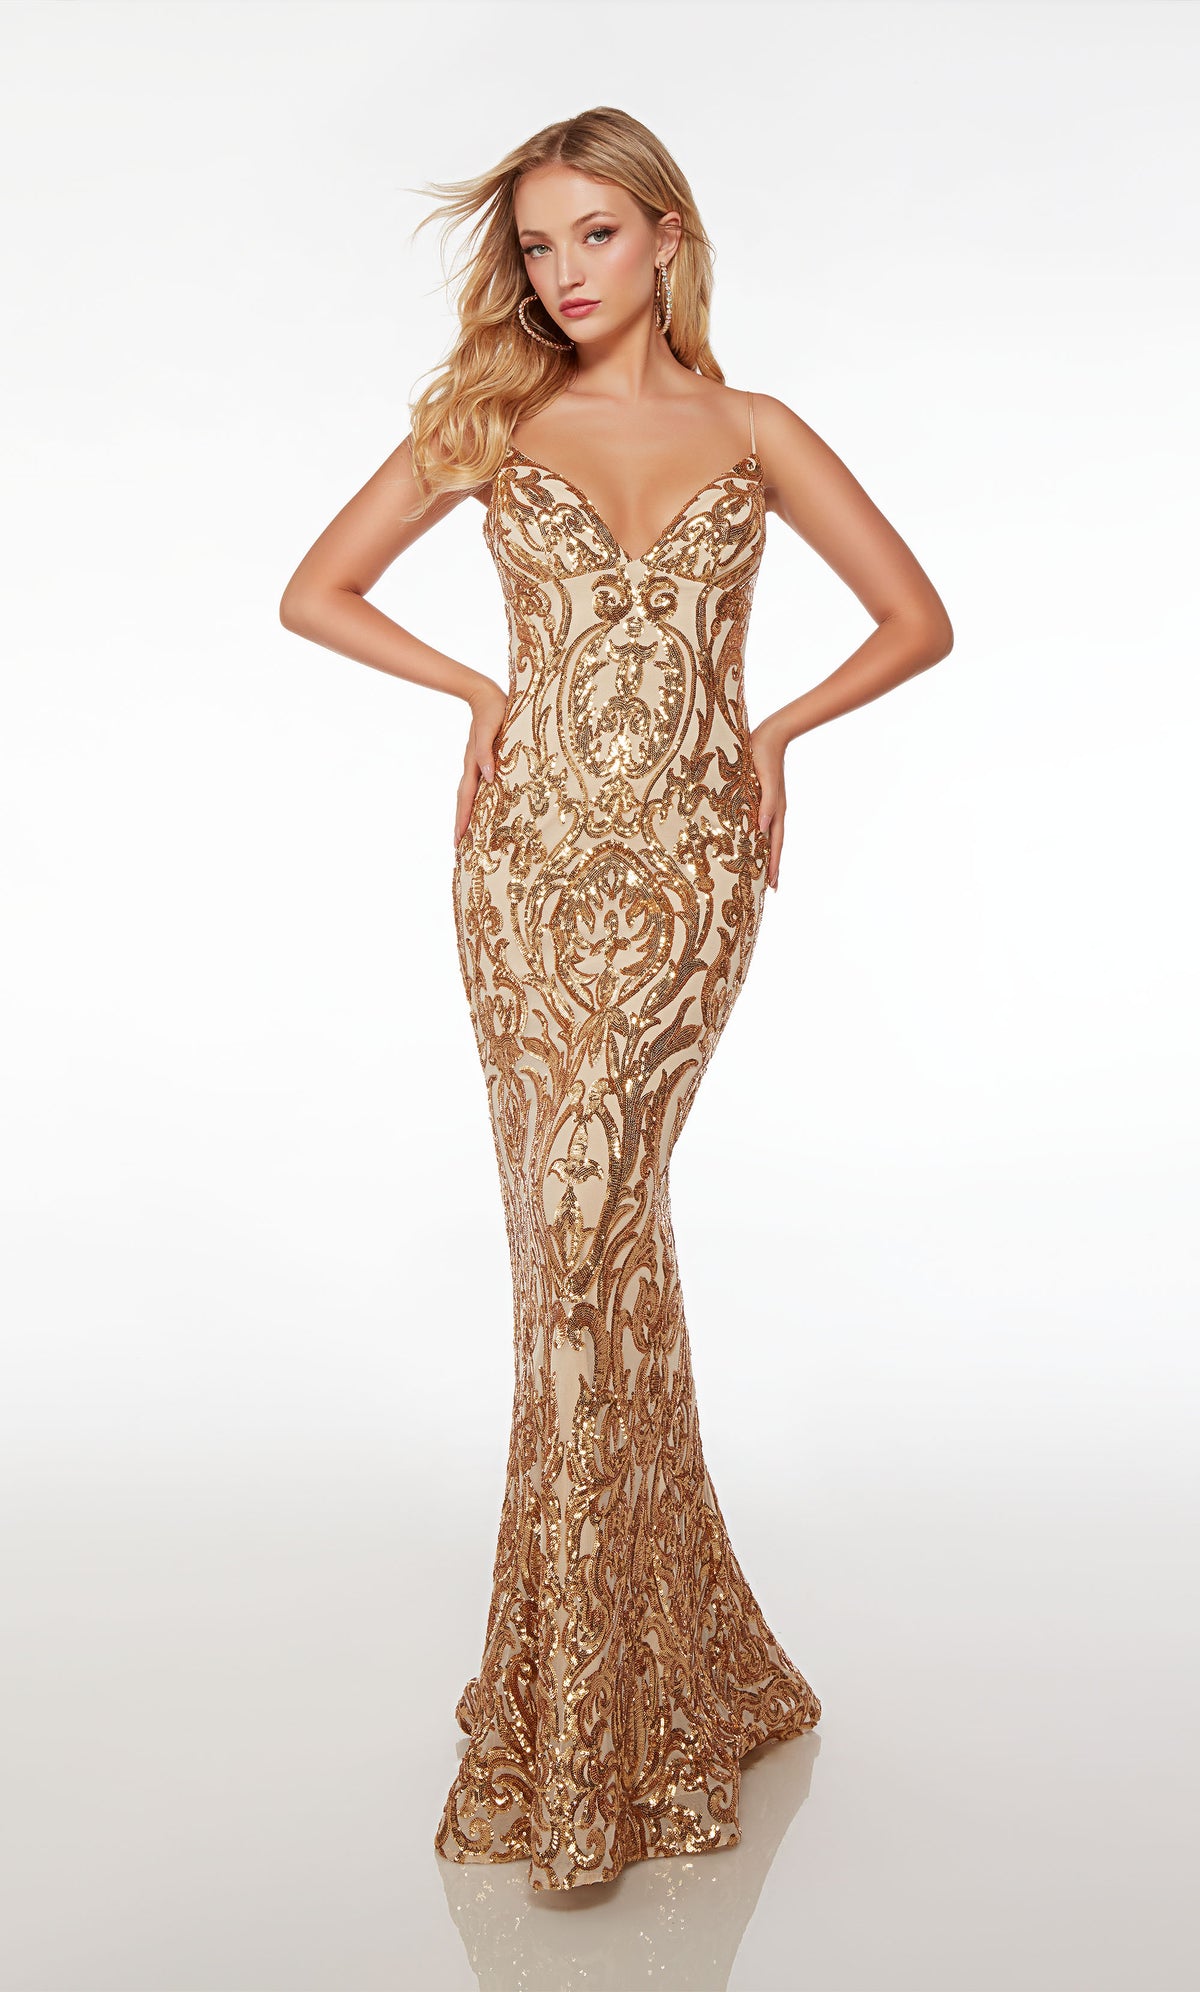 Fit-and-flare gold prom dress with V neckline, dual spaghetti straps, lace-up back, and an train, featuring an gorgeous paisley-patterned design.